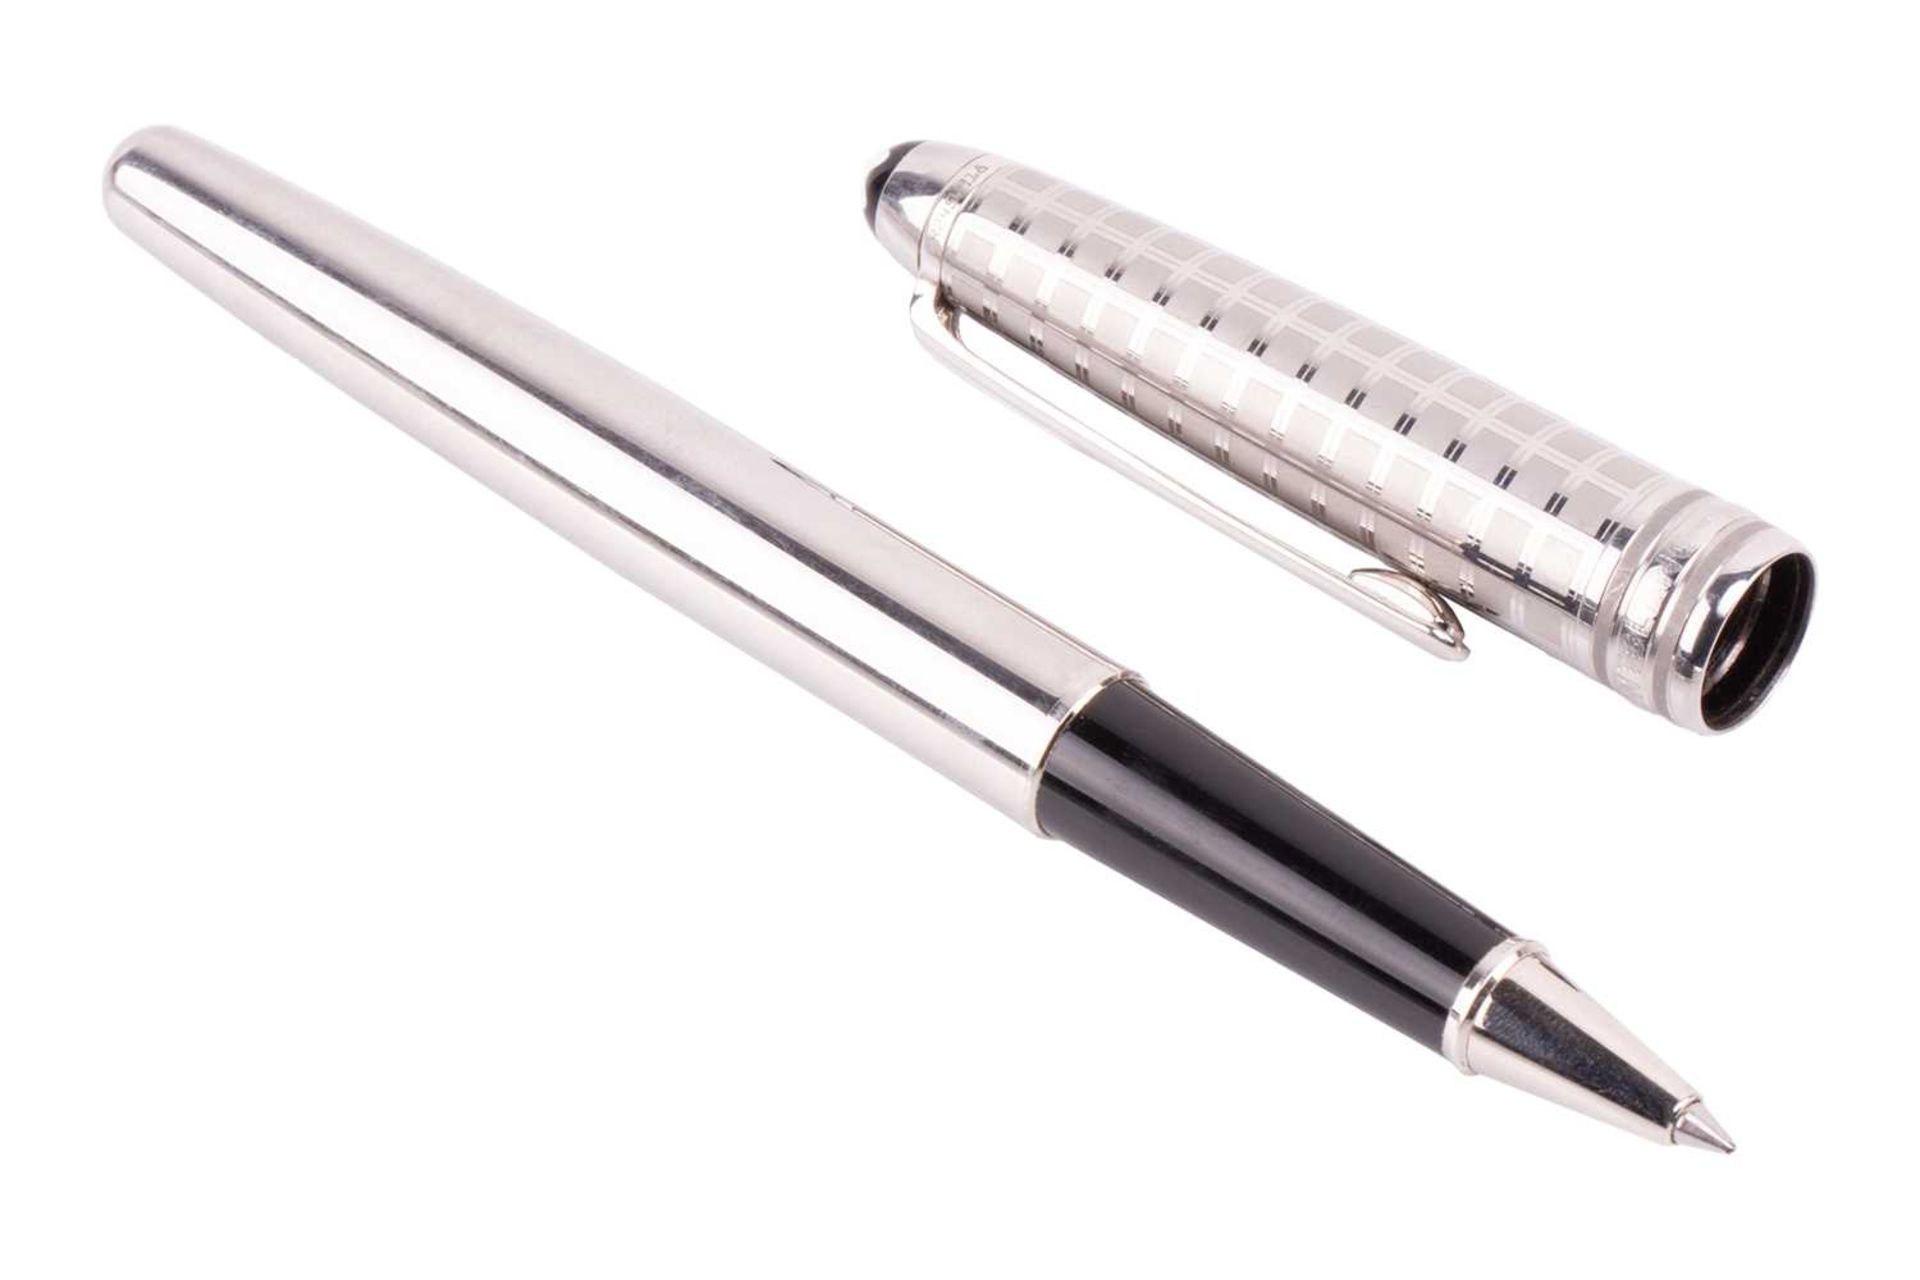 MontblancMeisterstück roller ball pen, the steel pull-off cap with inlaid emblem to the crown and